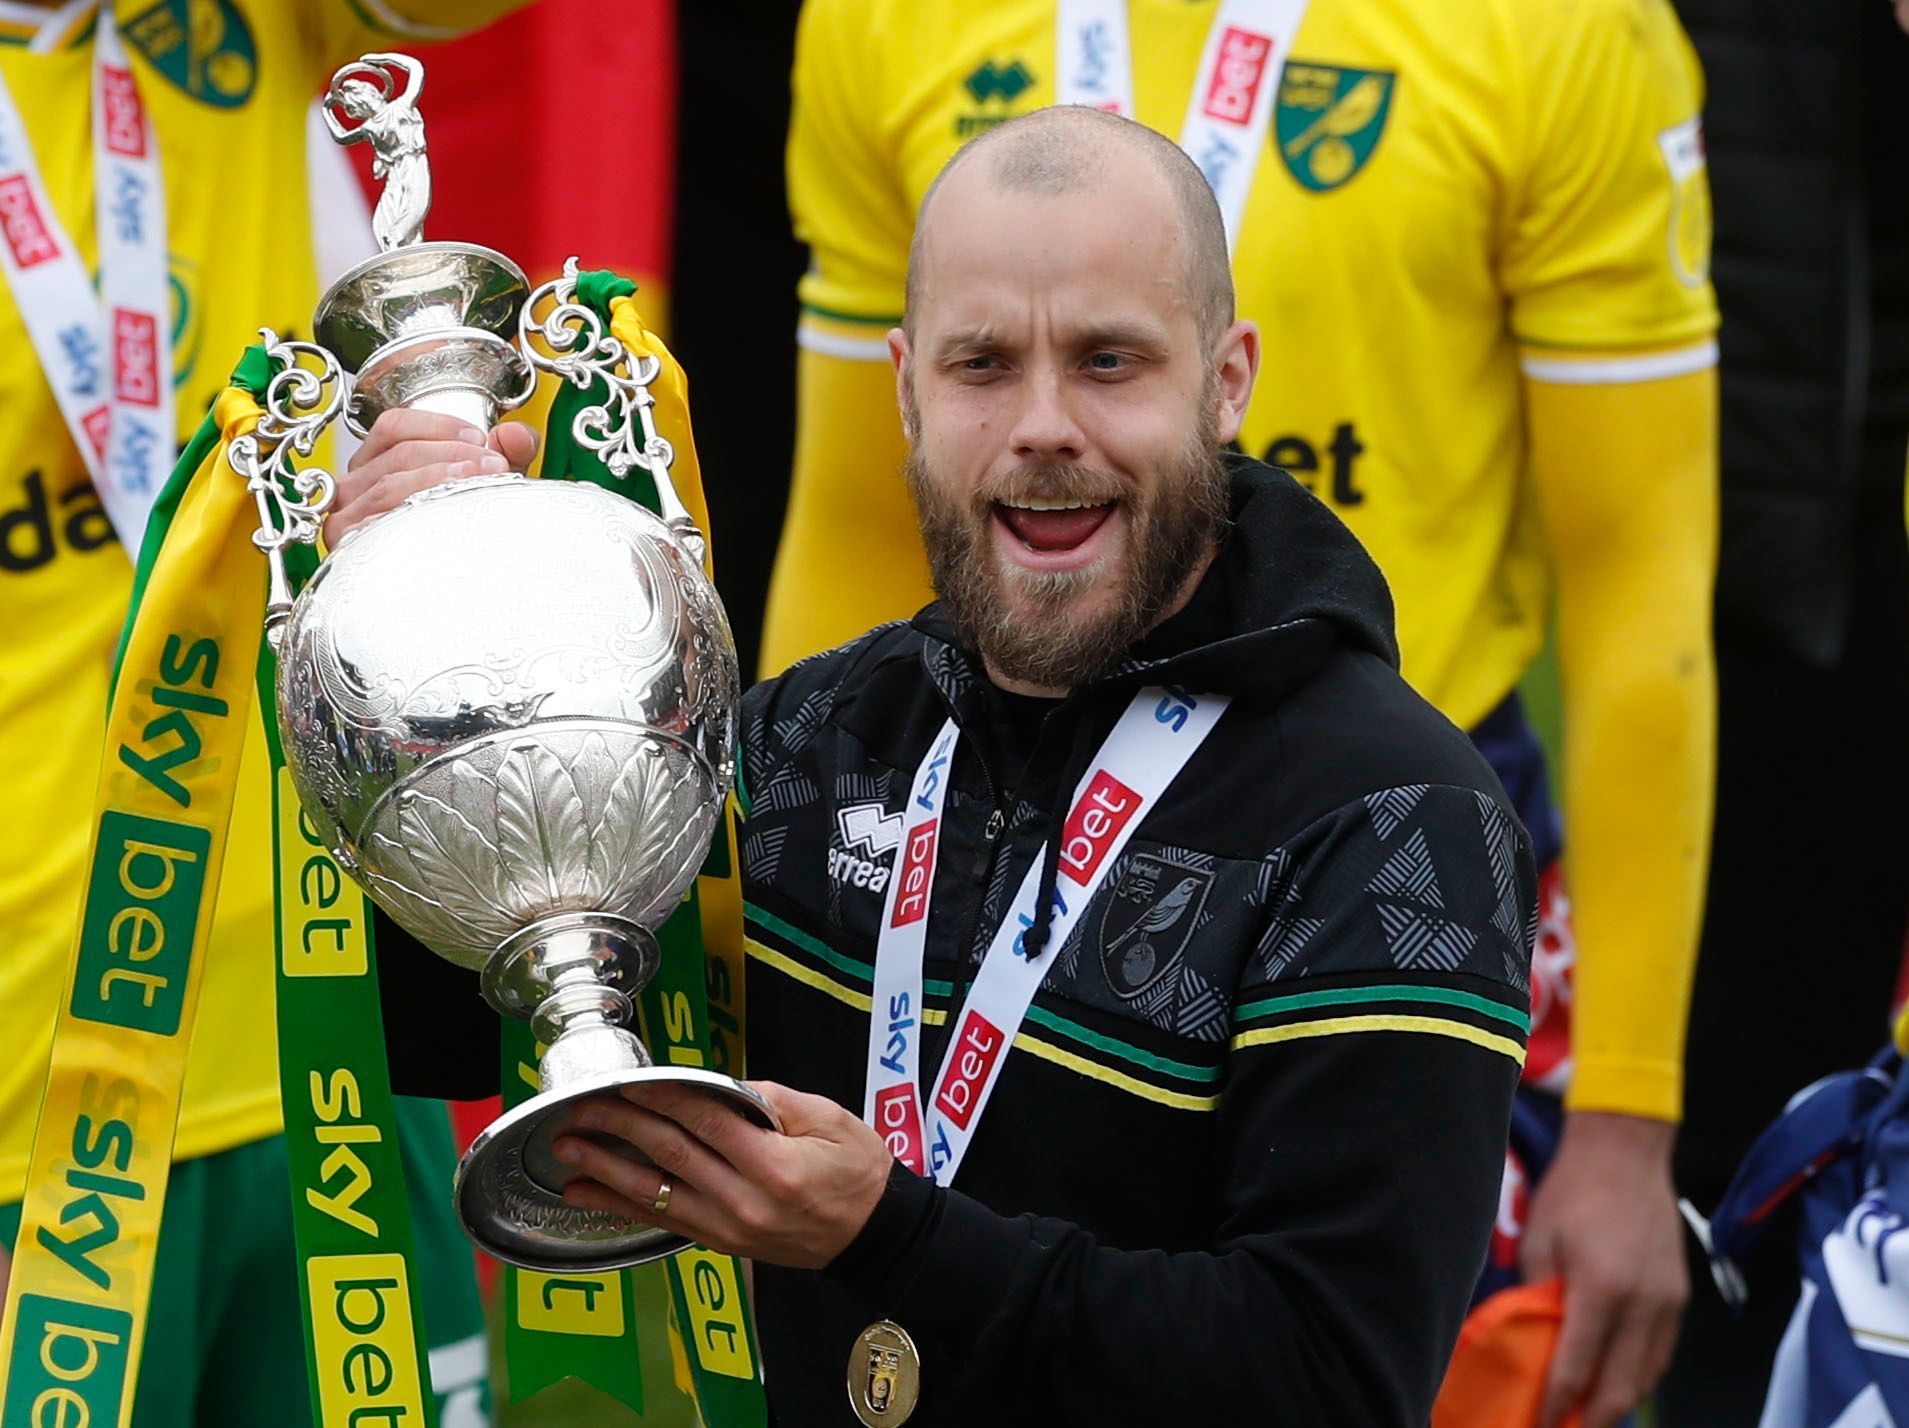 Soccer Football - Championship - Barnsley v Norwich City - Oakwell, Barnsley, Britain - May 8, 2021 Norwich City's Teemu Pukki celebrates winning the Championship with the trophy Action Images via Reuters/Lee Smith EDITORIAL USE ONLY. No use with unauthorized audio, video, data, fixture lists, club/league logos or 'live' services. Online in-match use limited to 75 images, no video emulation. No use in betting, games or single club /league/player publications.  Please contact your account represe